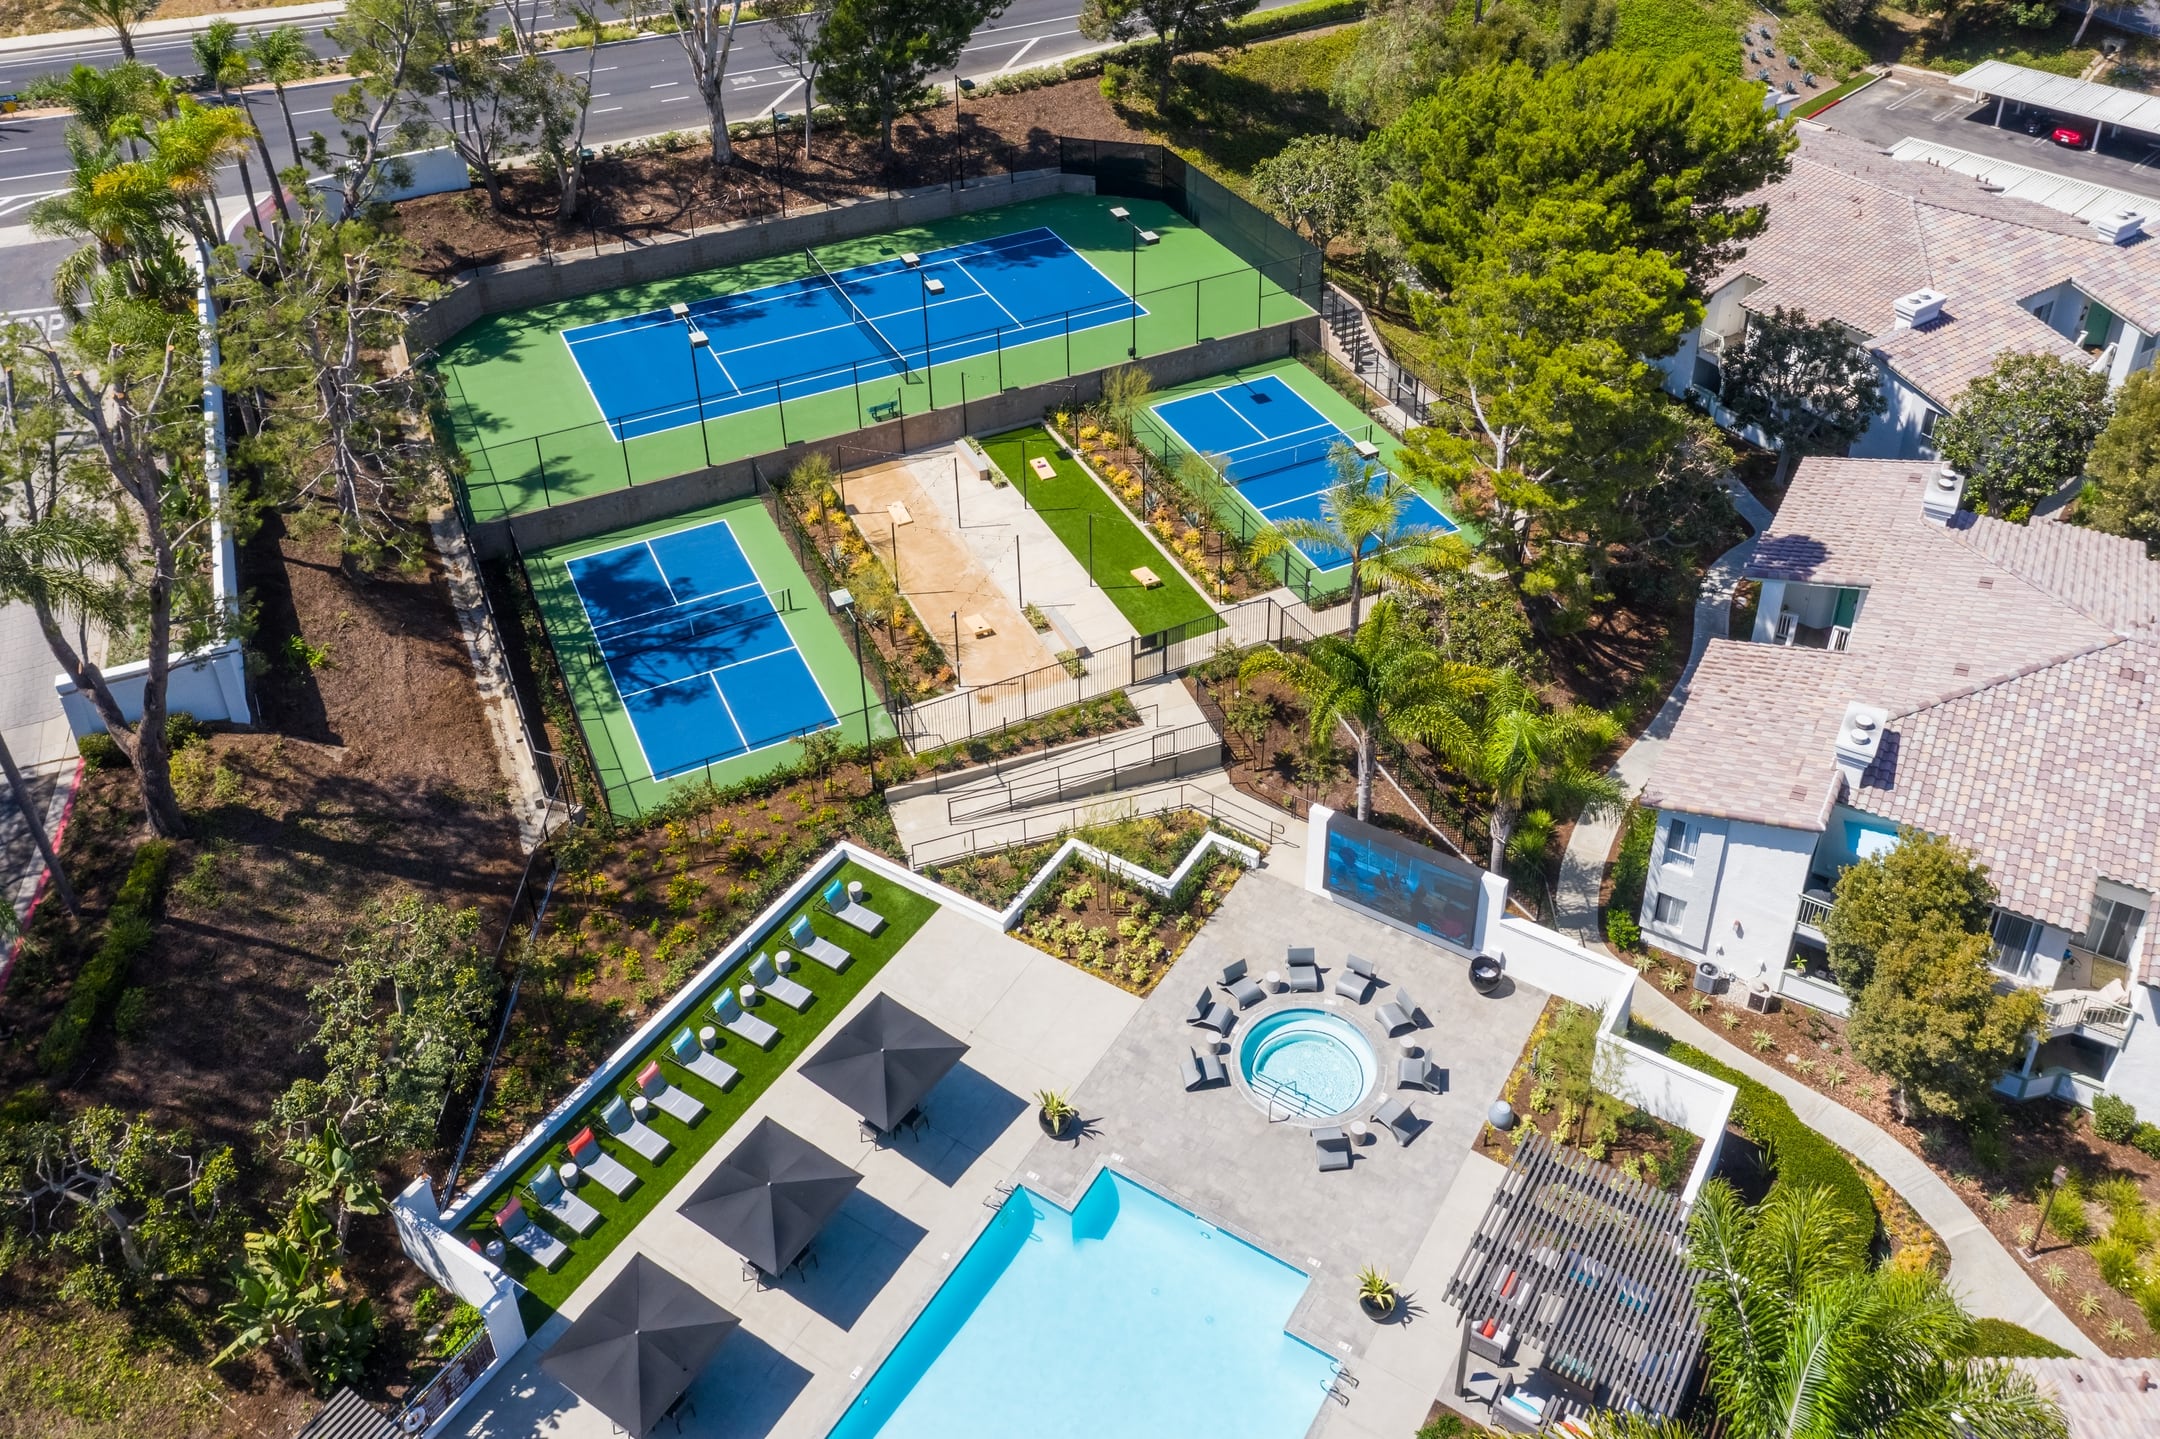  Birdseye view of Resort-Style Swimming Pool w/ Wi-Fi, Tennis courts, and Pickleball Courts